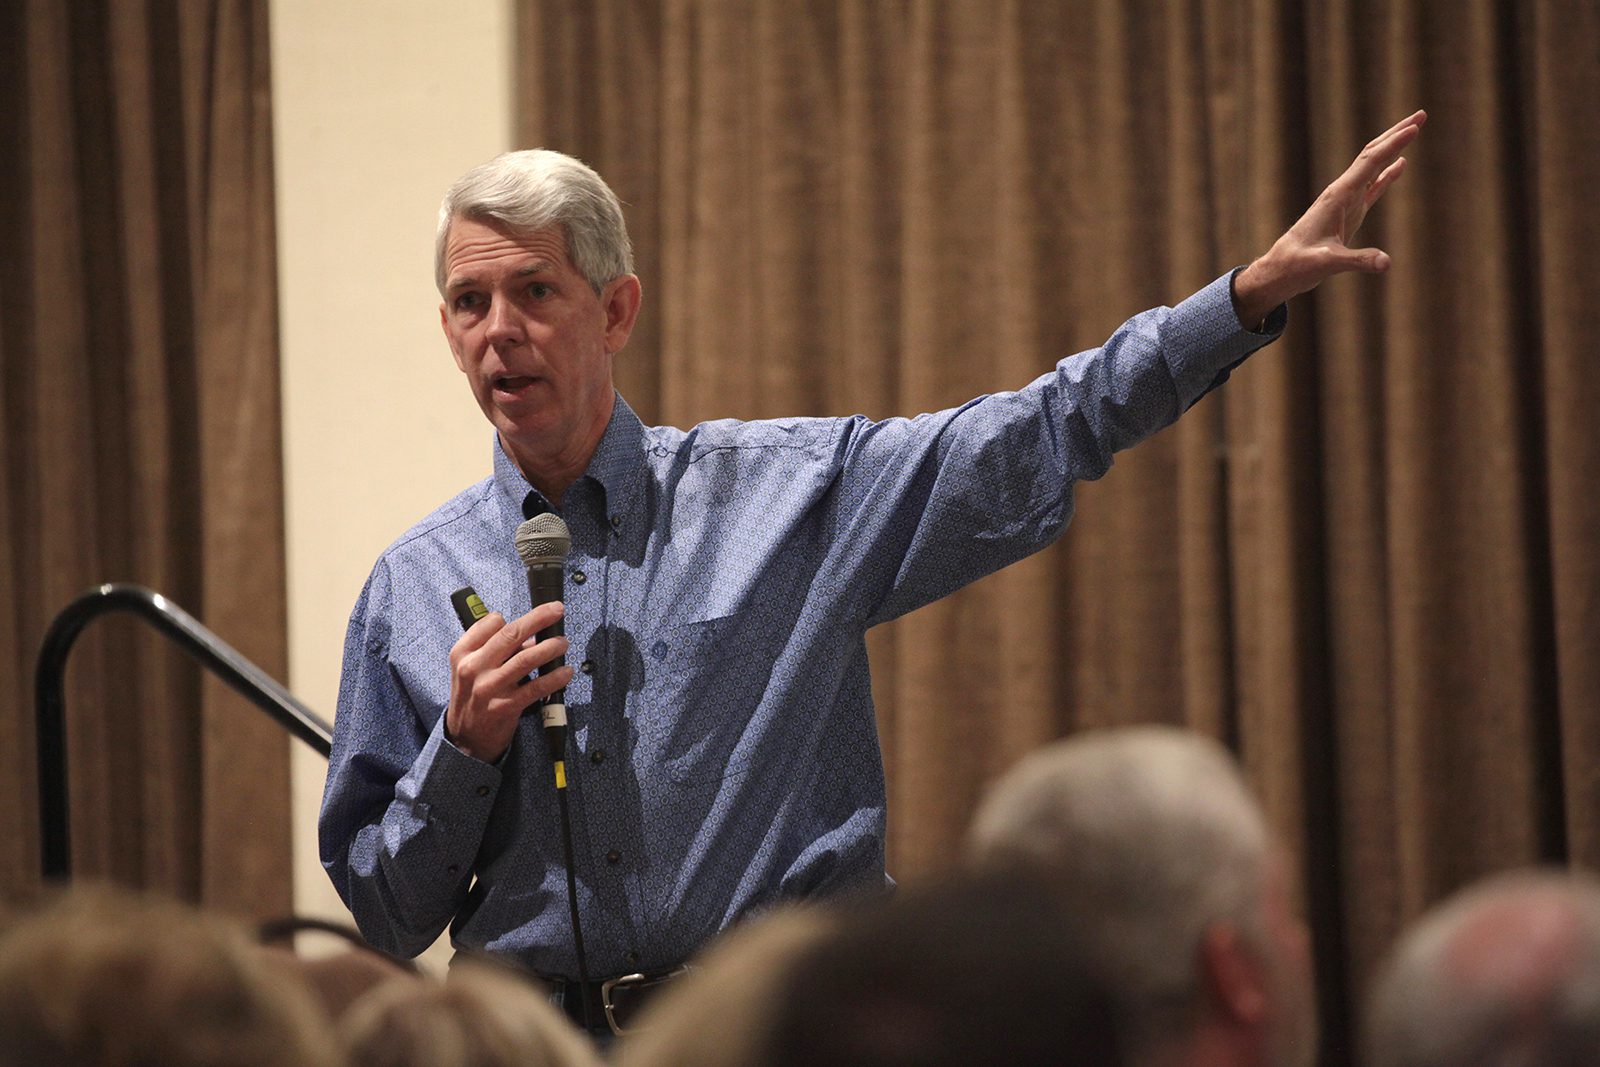 David Barton addresses attendees at an event titled "An Evening Devotional on the U.S. Constitution" in Mesa, Arizona, on March 20, 2016. Photo by Gage Skidmore/Flickr/Creative Commons